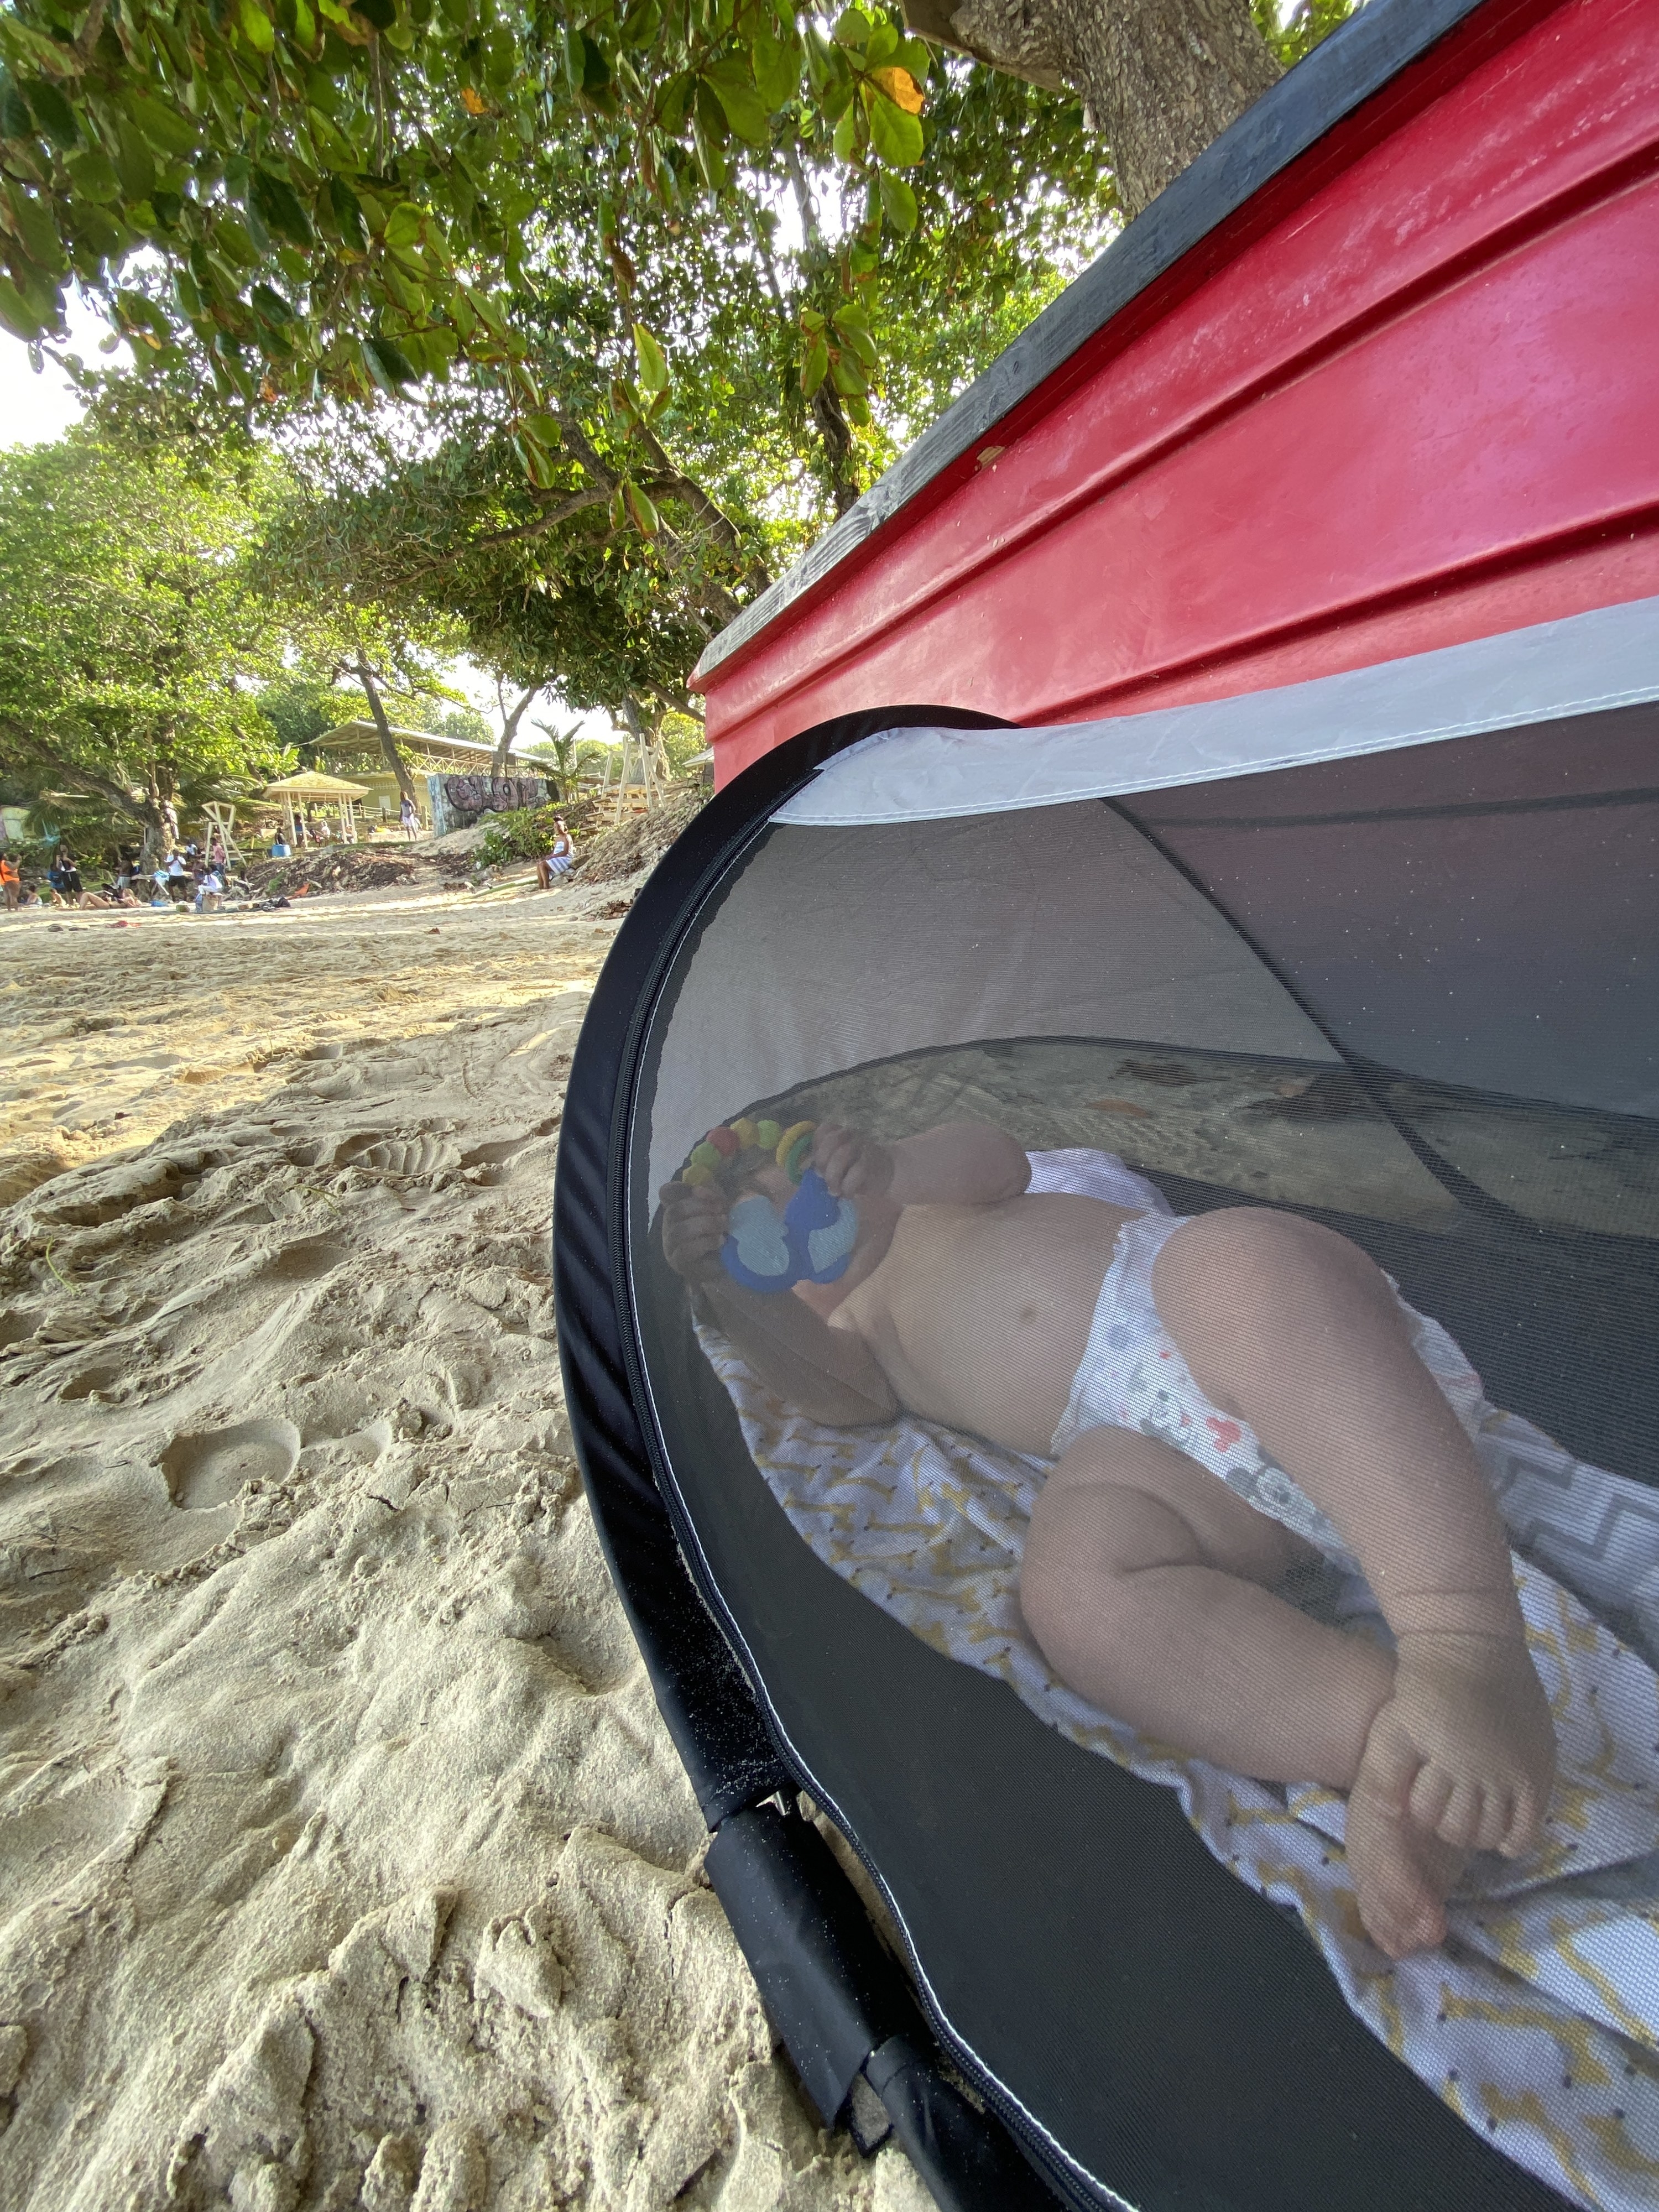 Baby in a beach tent on the sand